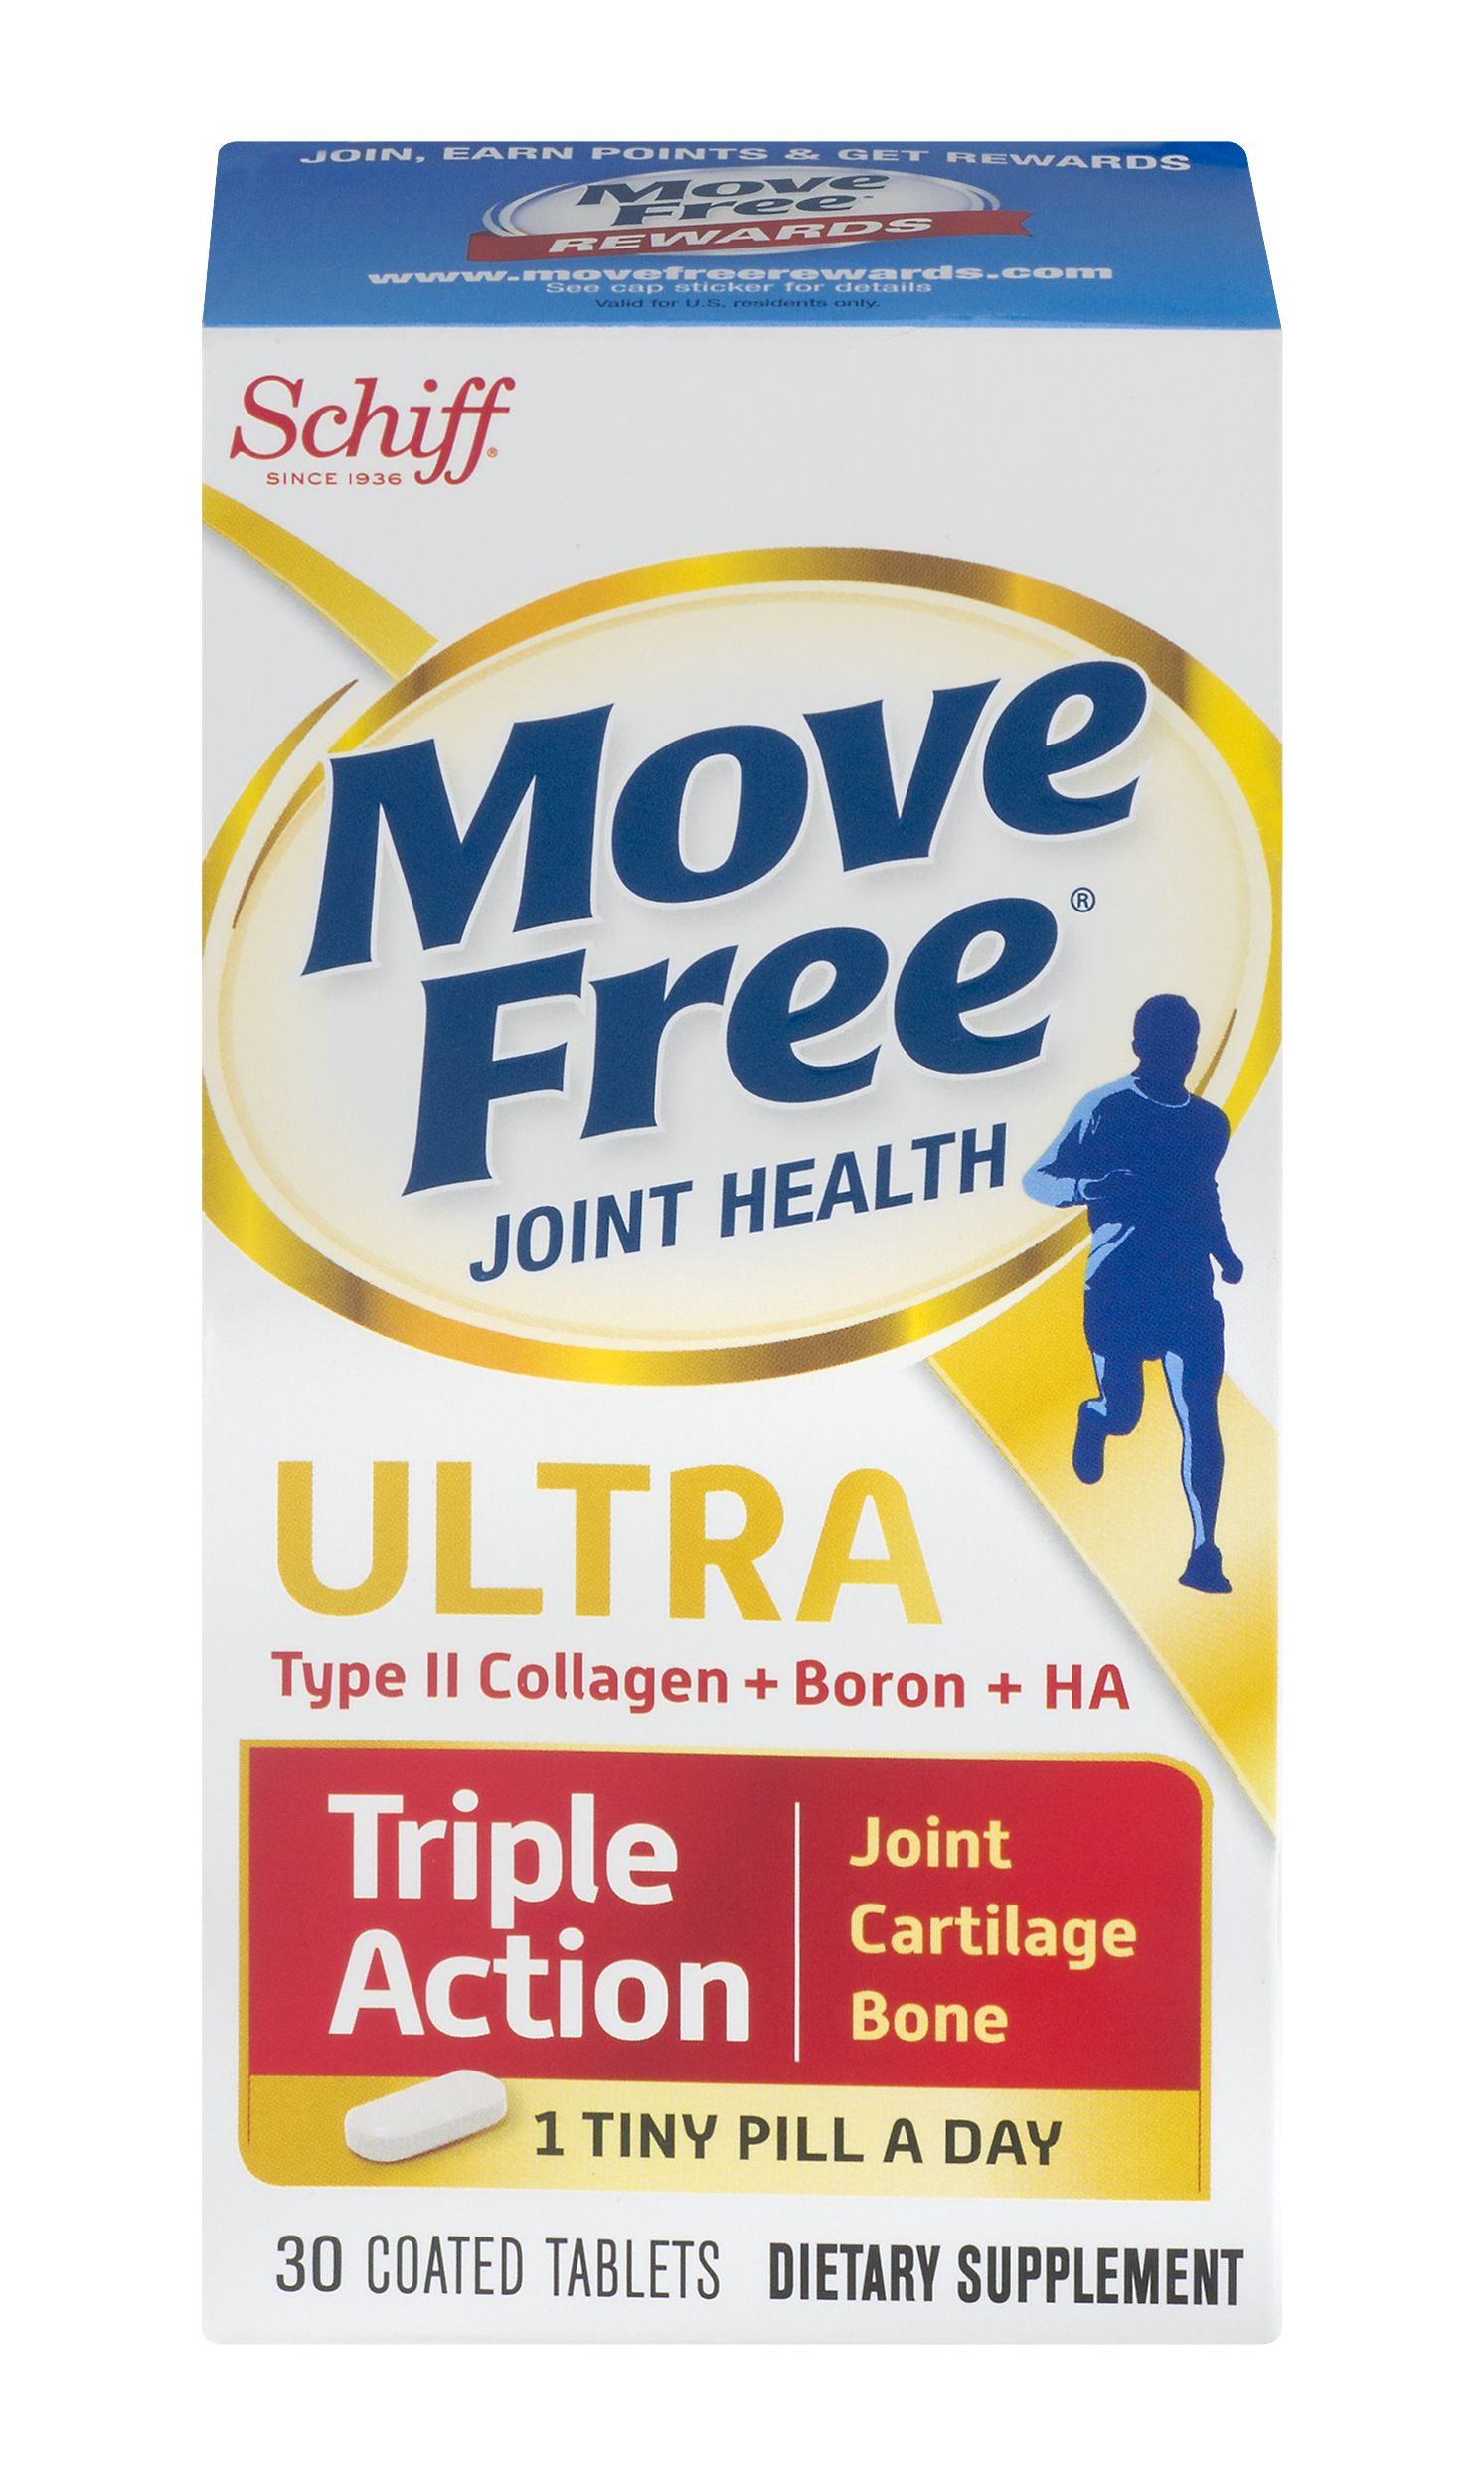 Schiff Move Free Ultra Coated Tablets - 30 ct pkg